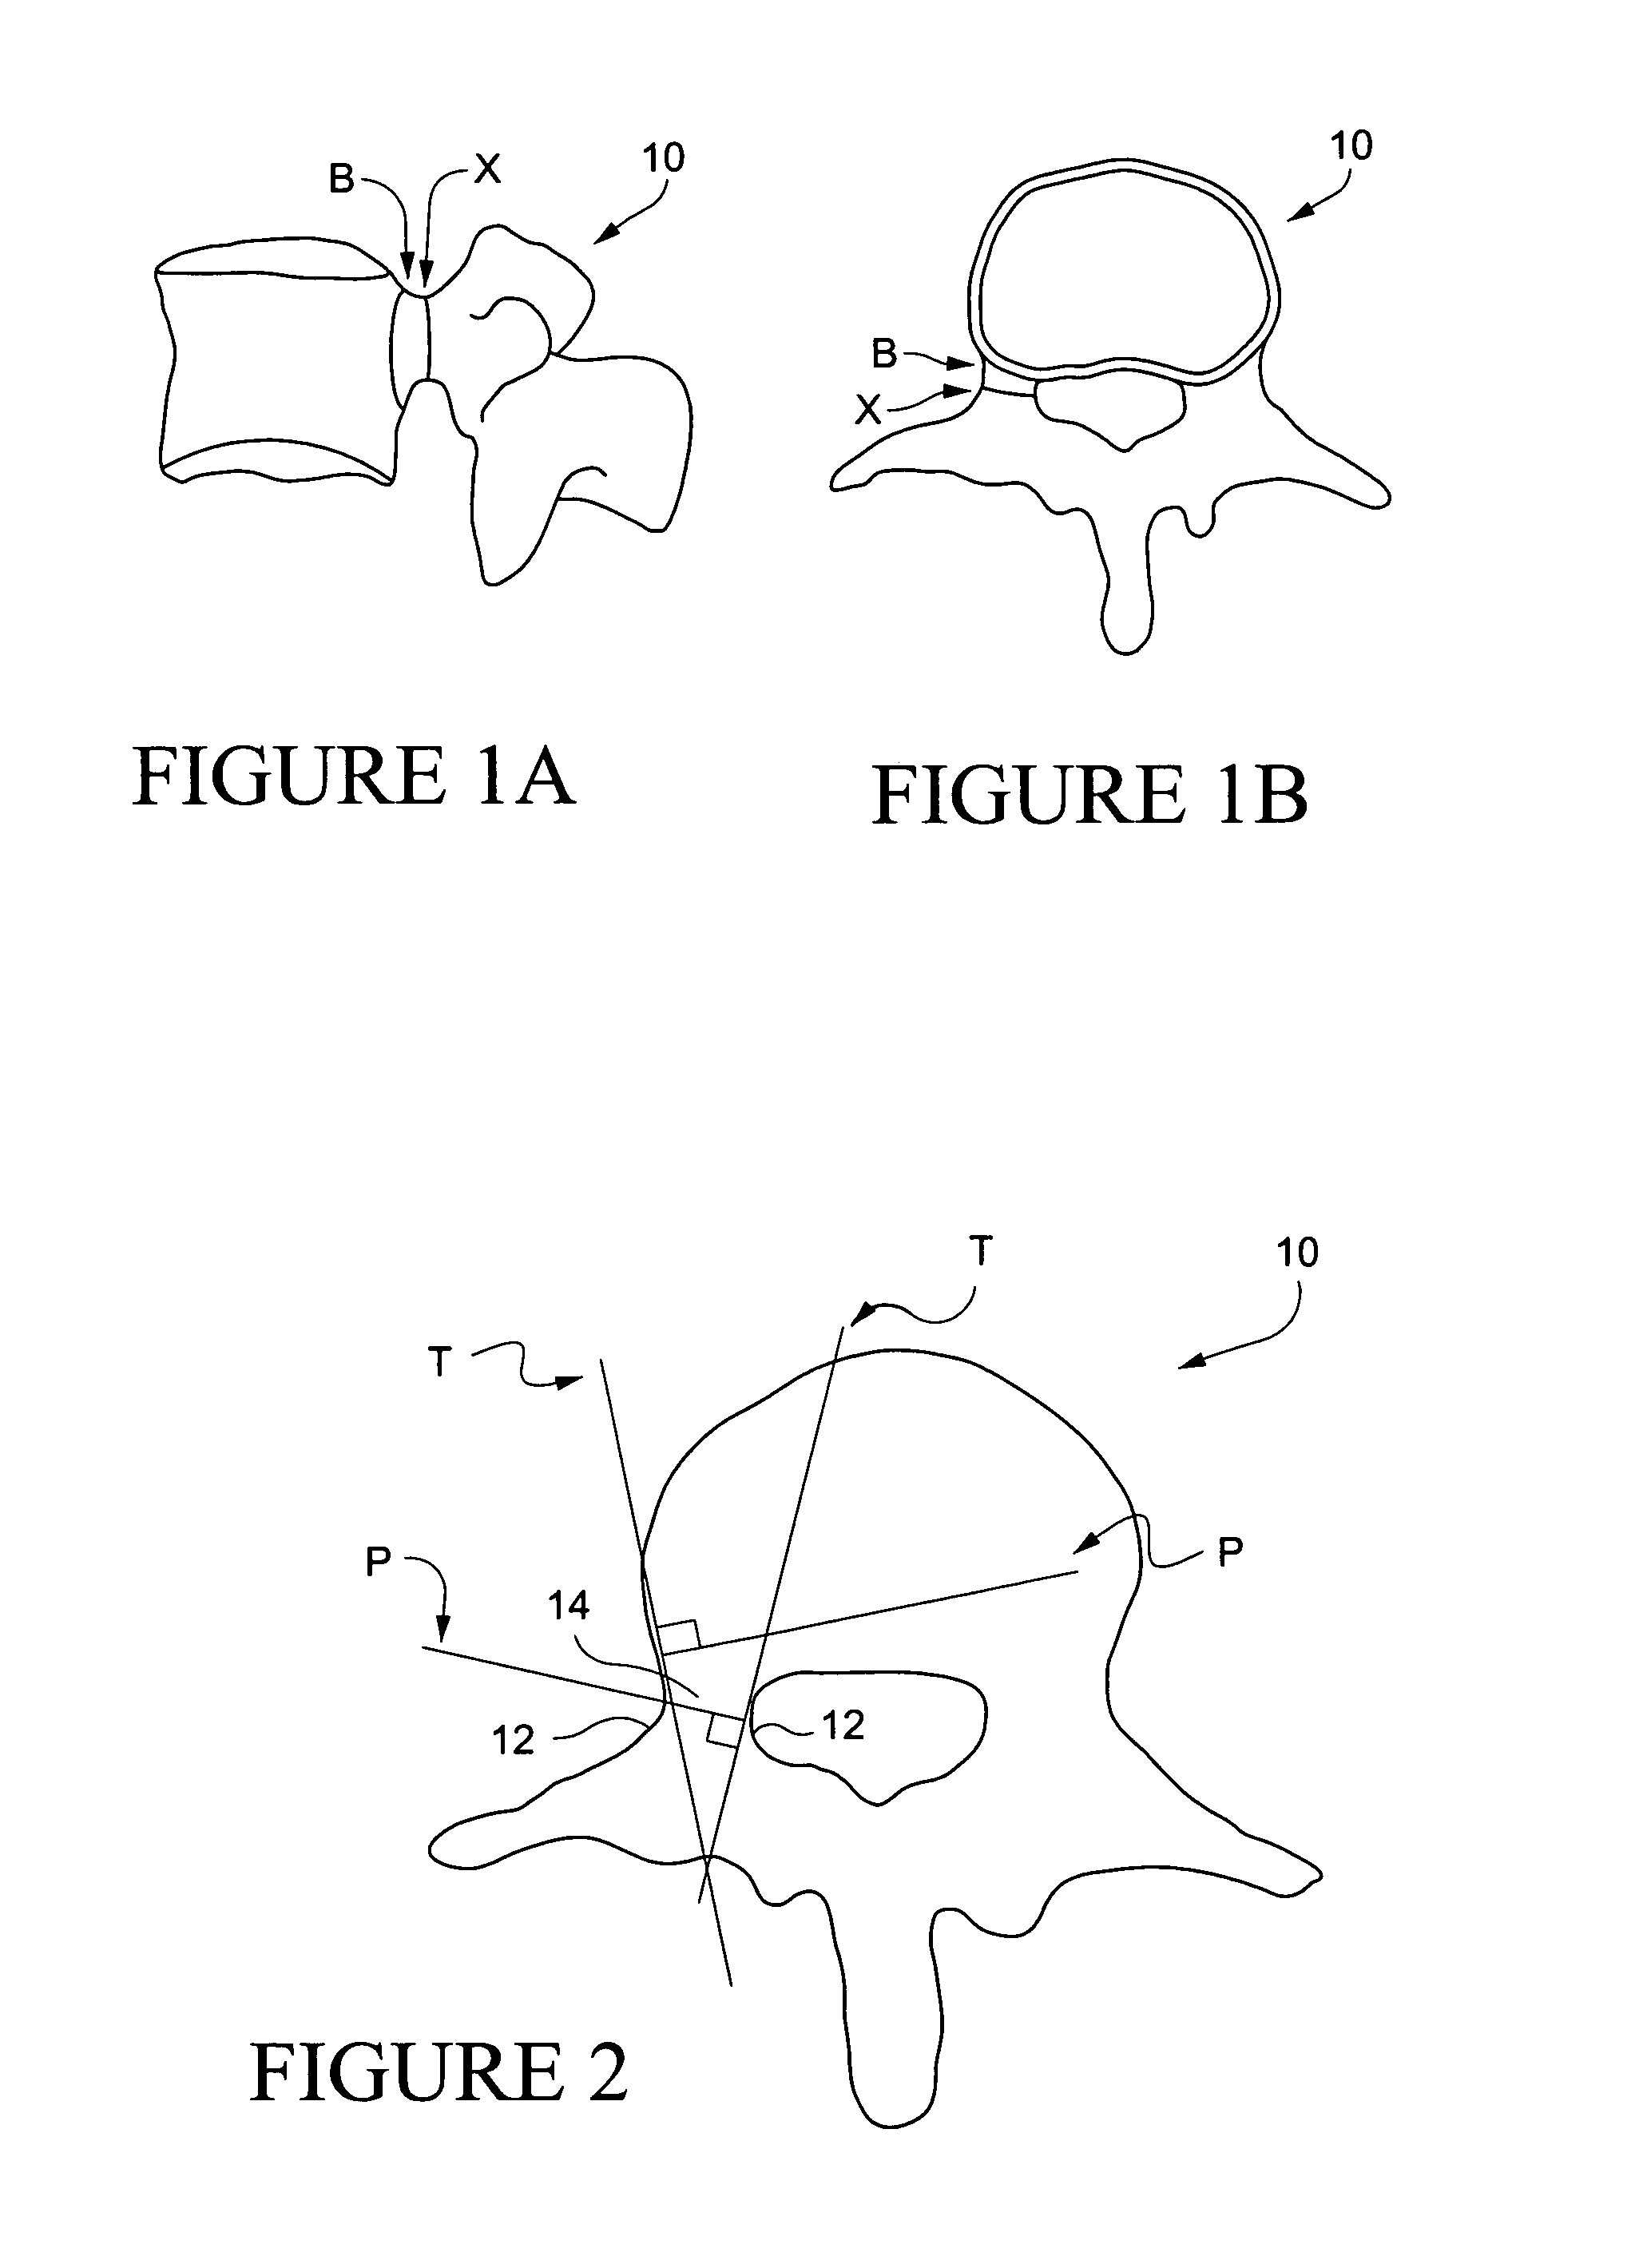 Methods for determining pedicle base circumference, pedicle isthmus and center of the pedicle isthmus for pedicle screw or instrument placement in spinal surgery